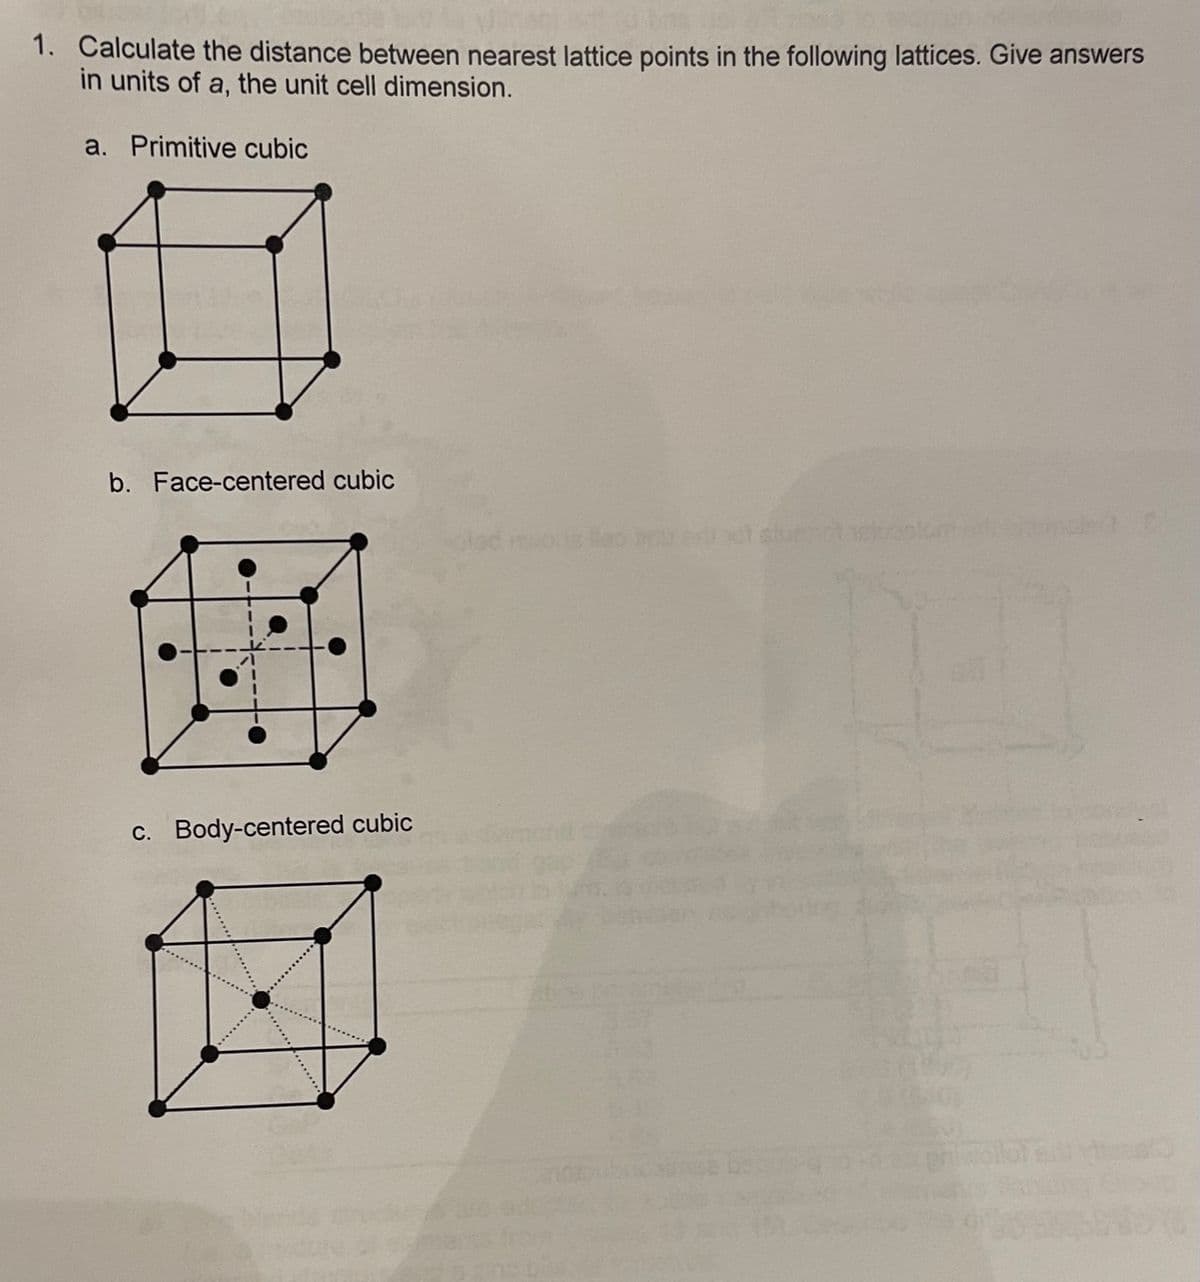 1. Calculate the distance between nearest lattice points in the following lattices. Give answers
in units of a, the unit cell dimension.
a. Primitive cubic
b. Face-centered cubic
ALA
c. Body-centered cubic
1
Glad
slun